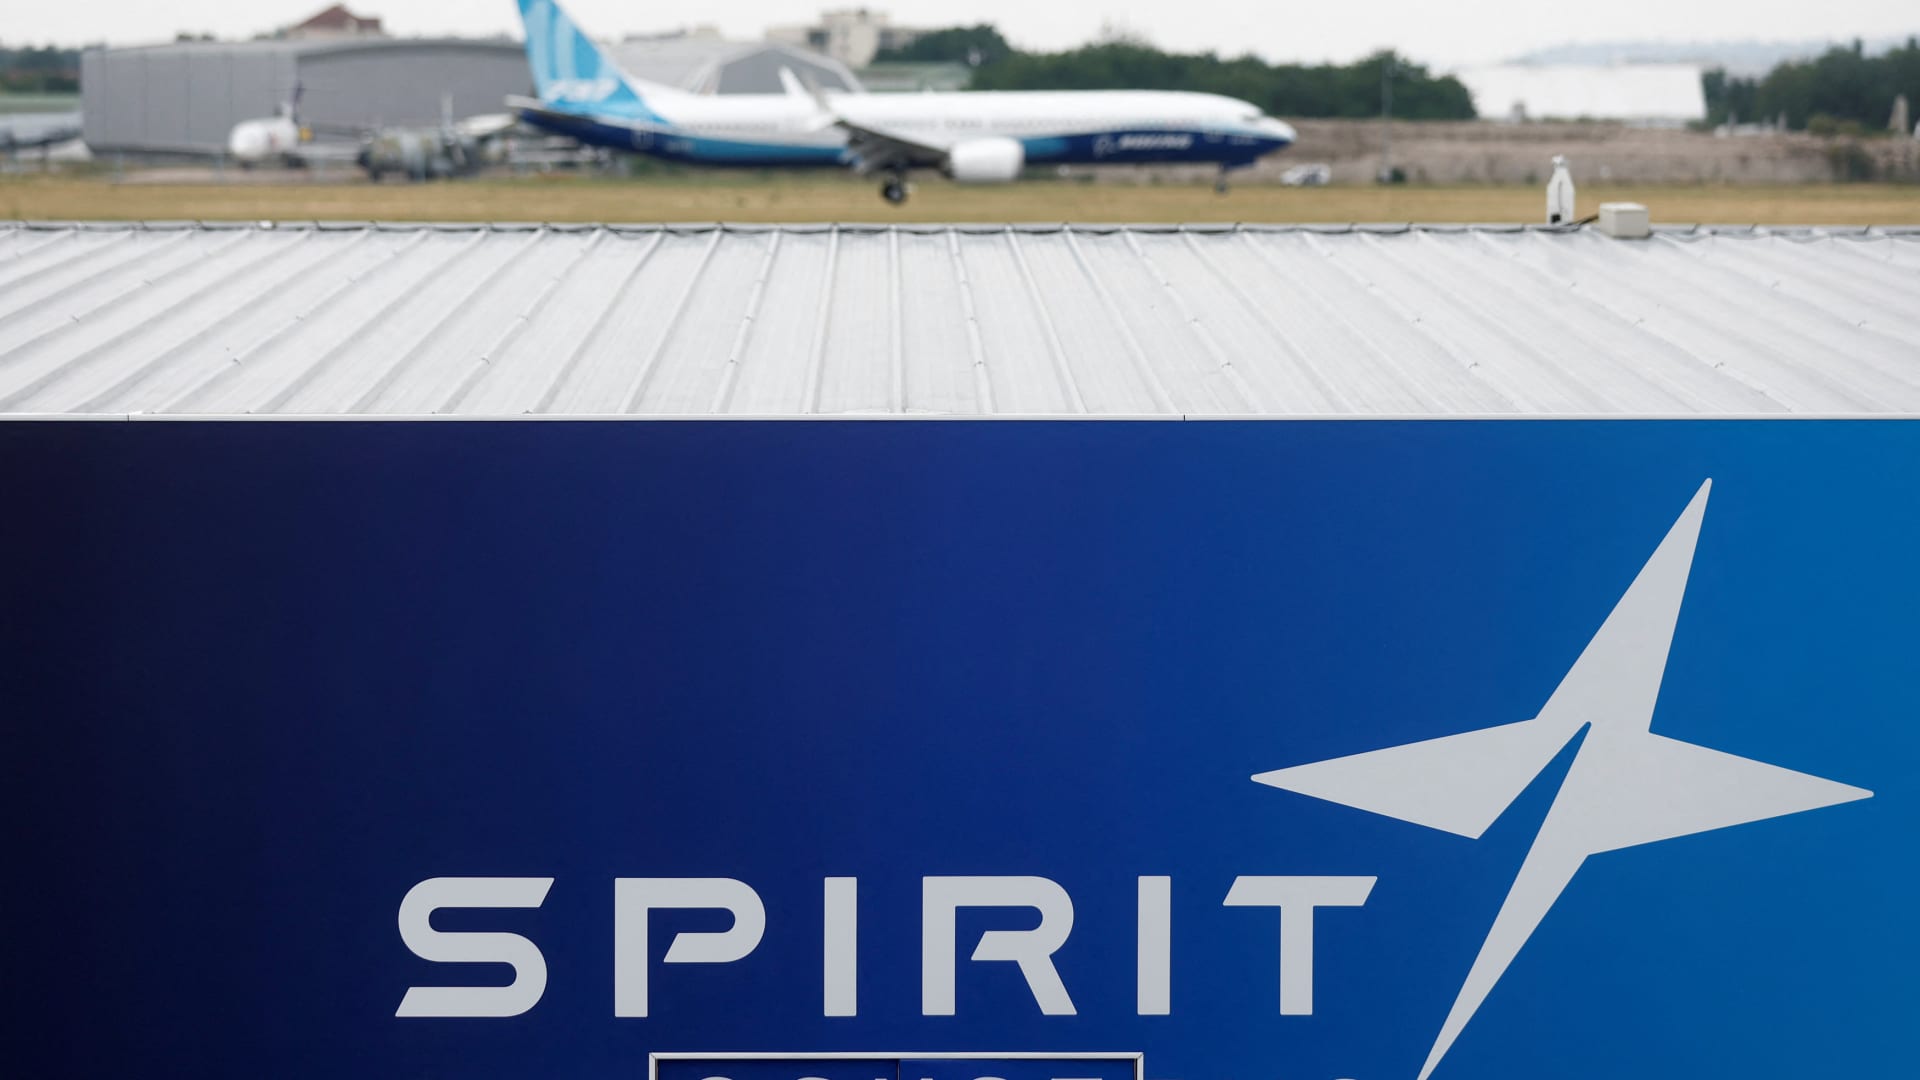 Boeing supplier Spirit AeroSystems is laying off employees due to lower deliveries